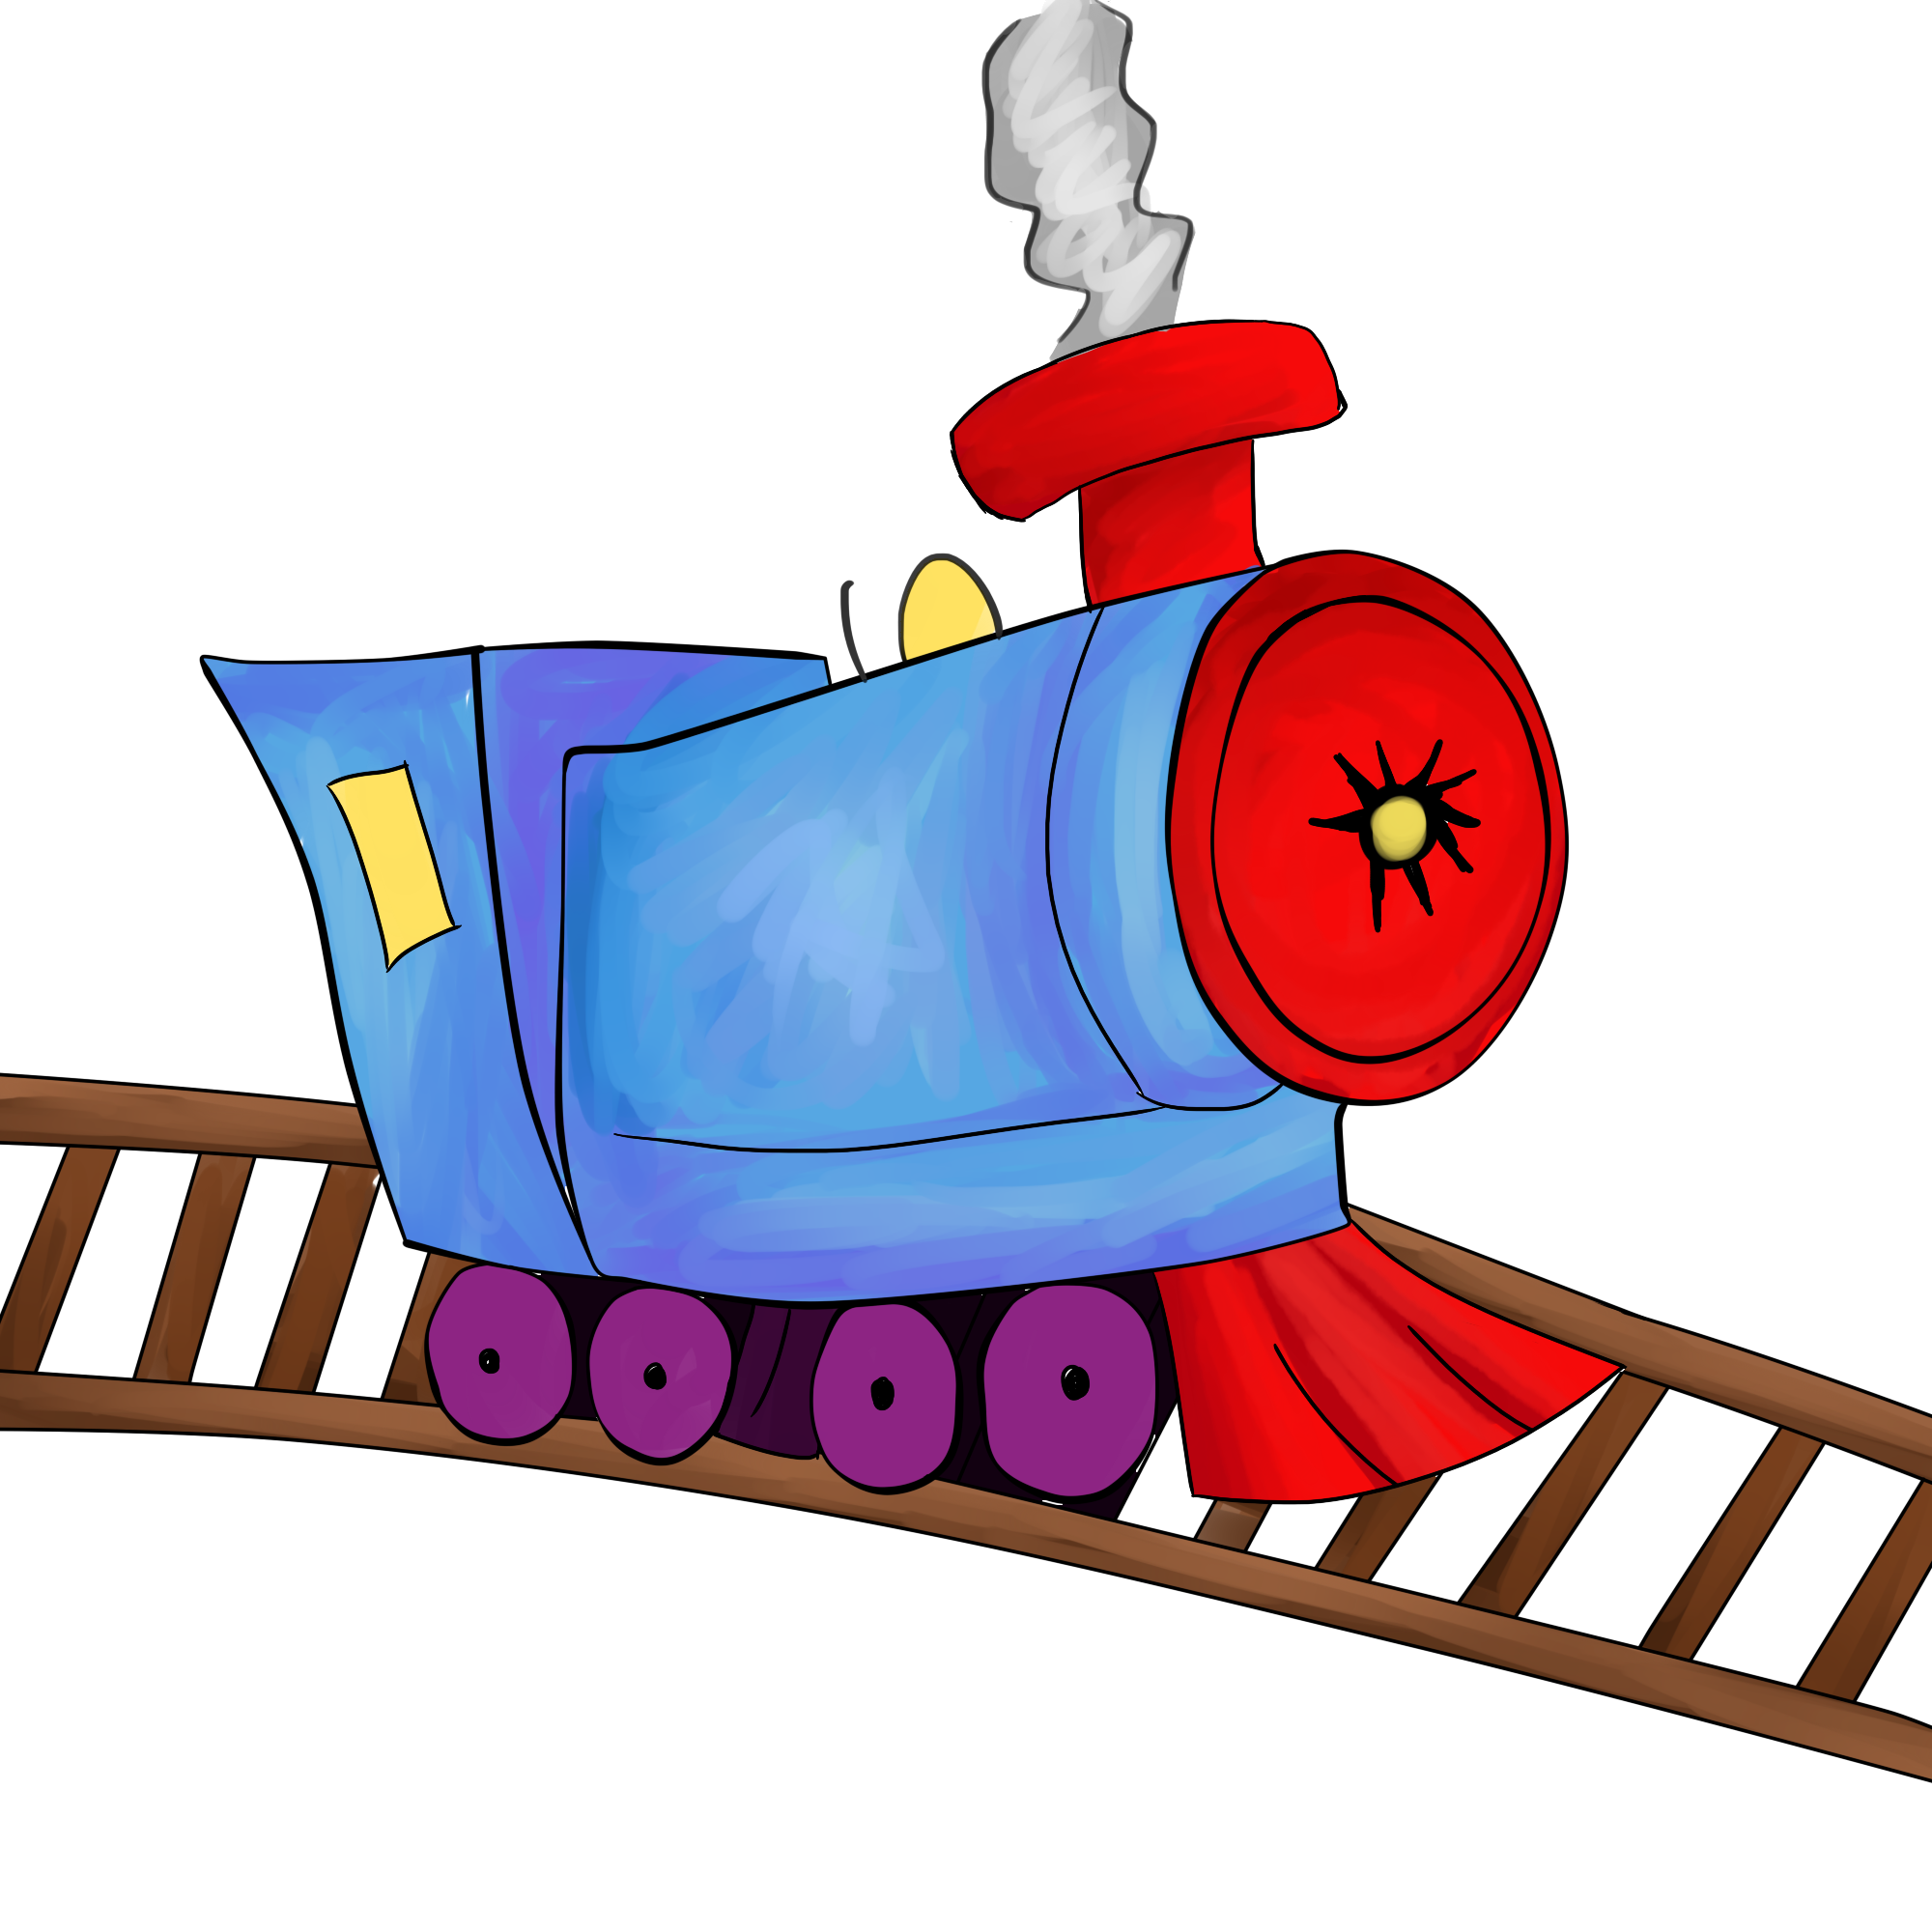 Cartoon Pictures Of Trains - ClipArt Best